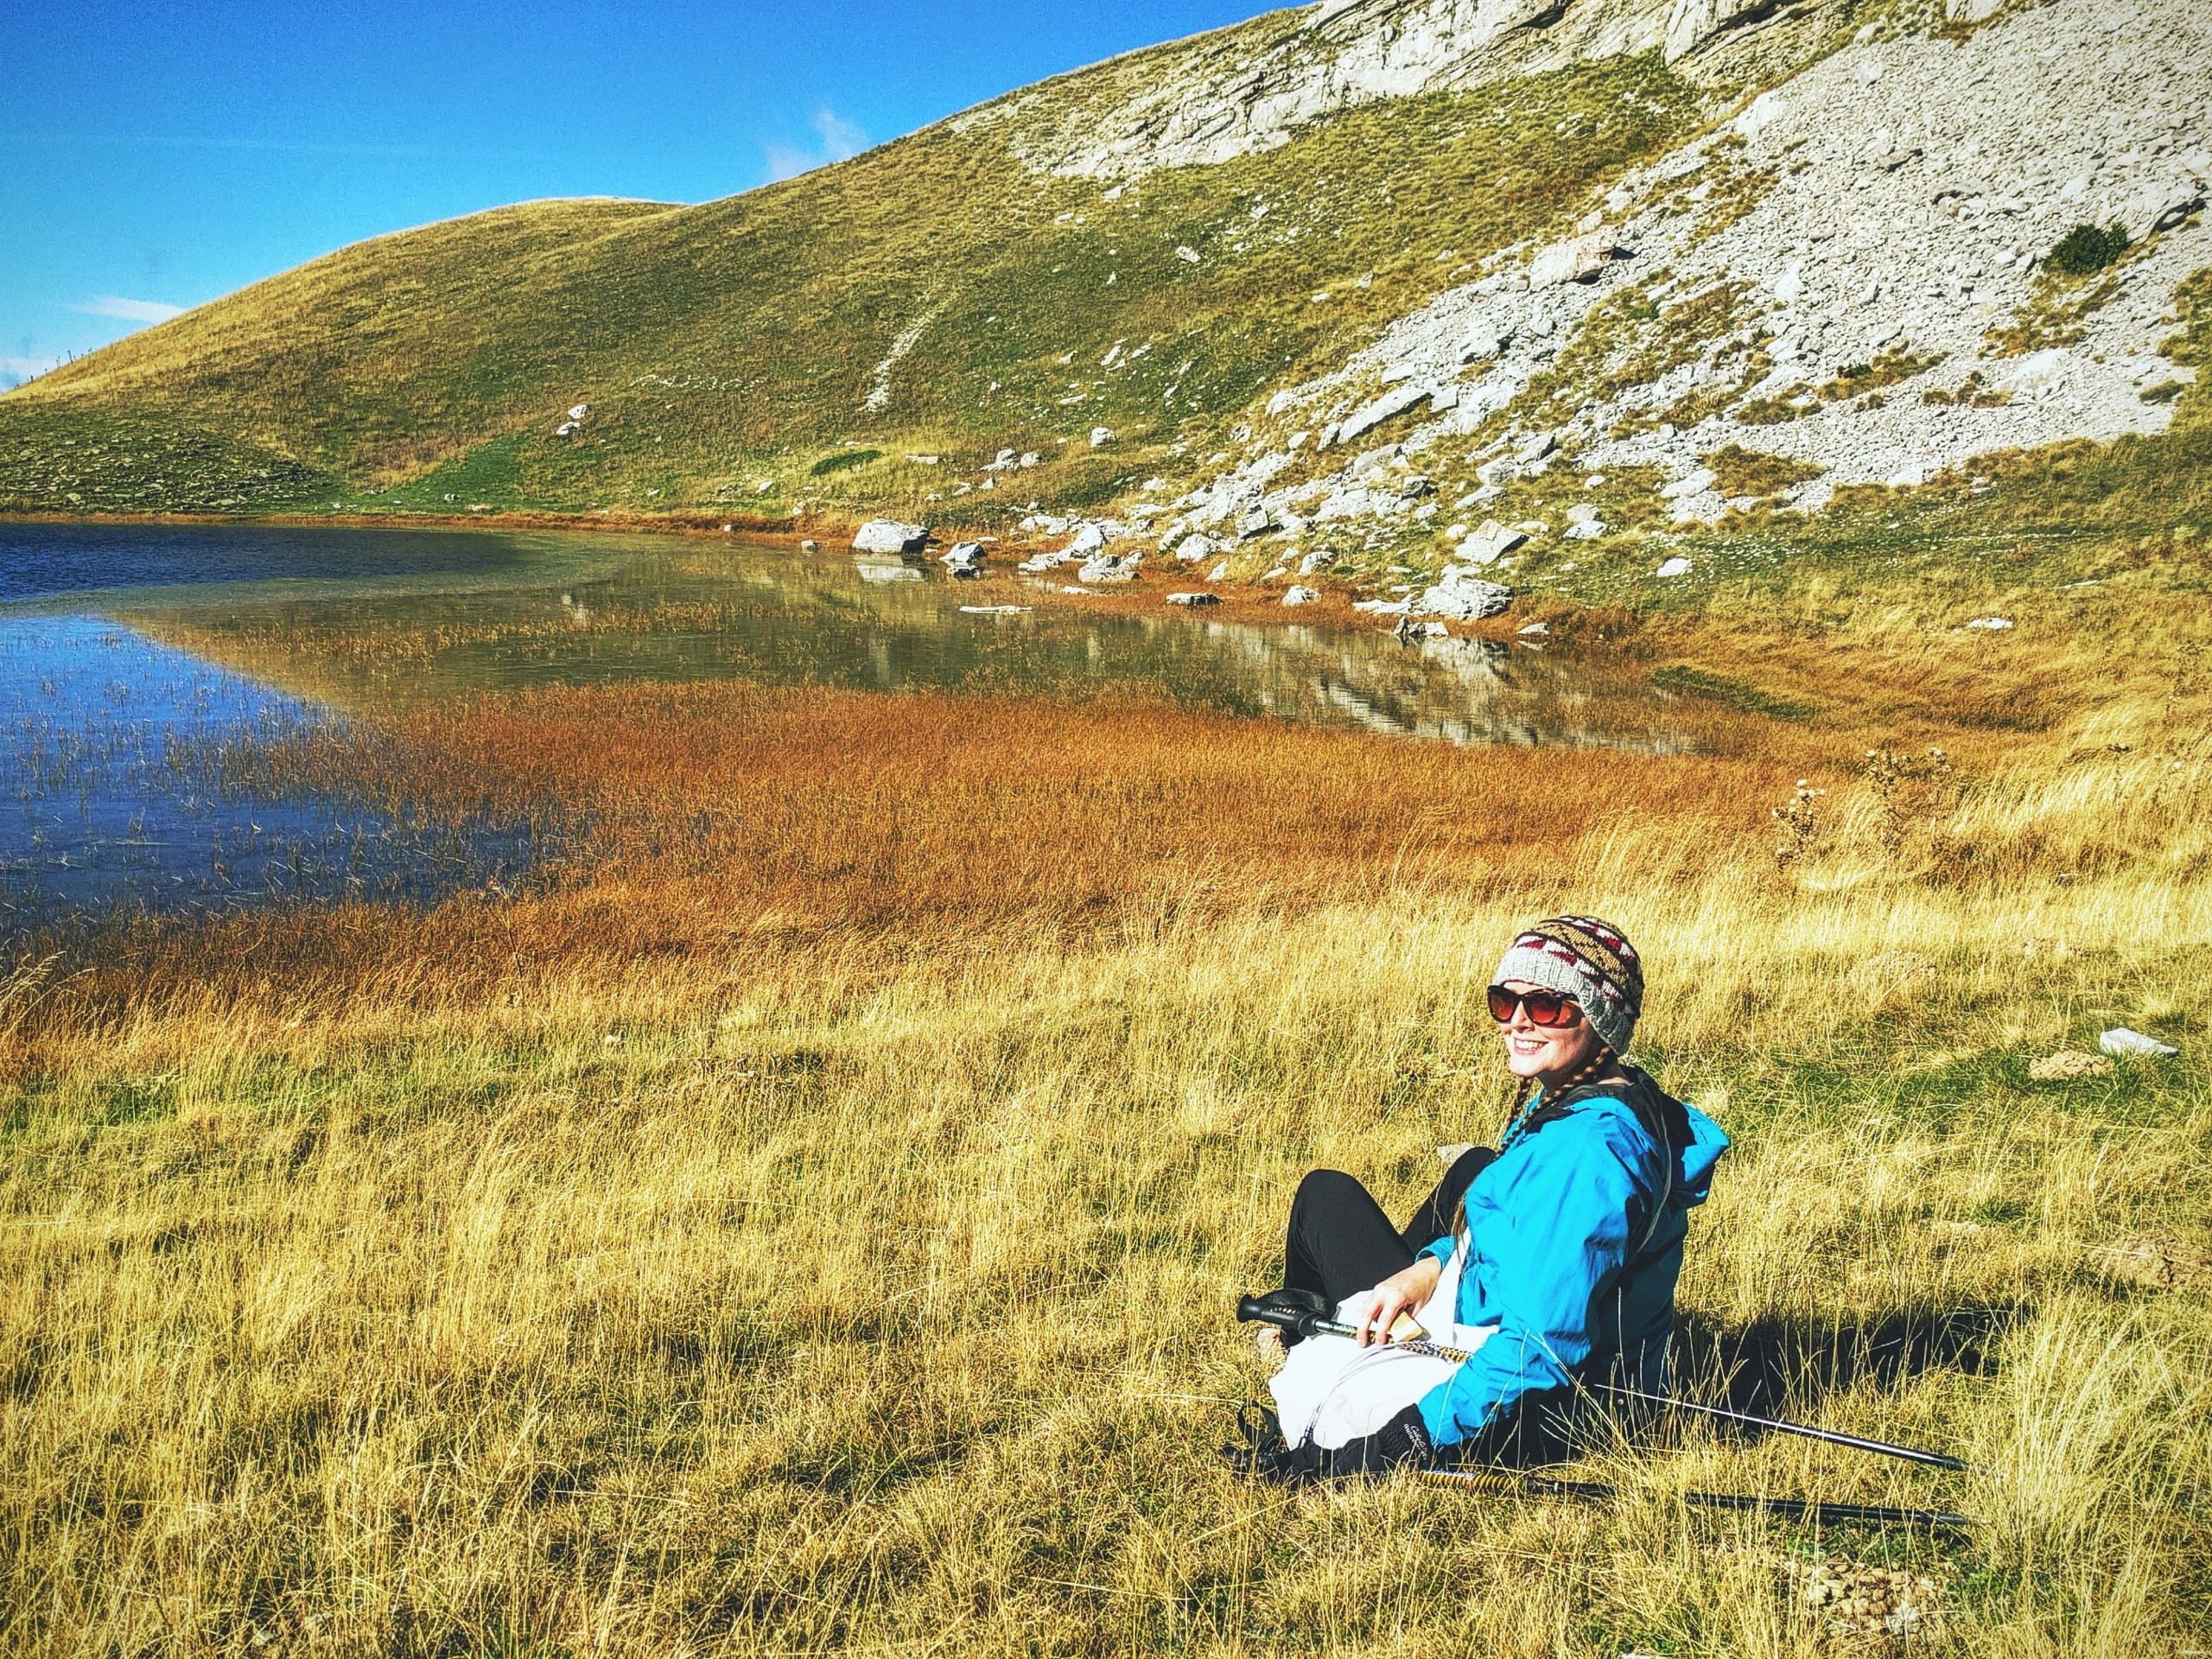 Hiker having a rest near the small lake in Greece